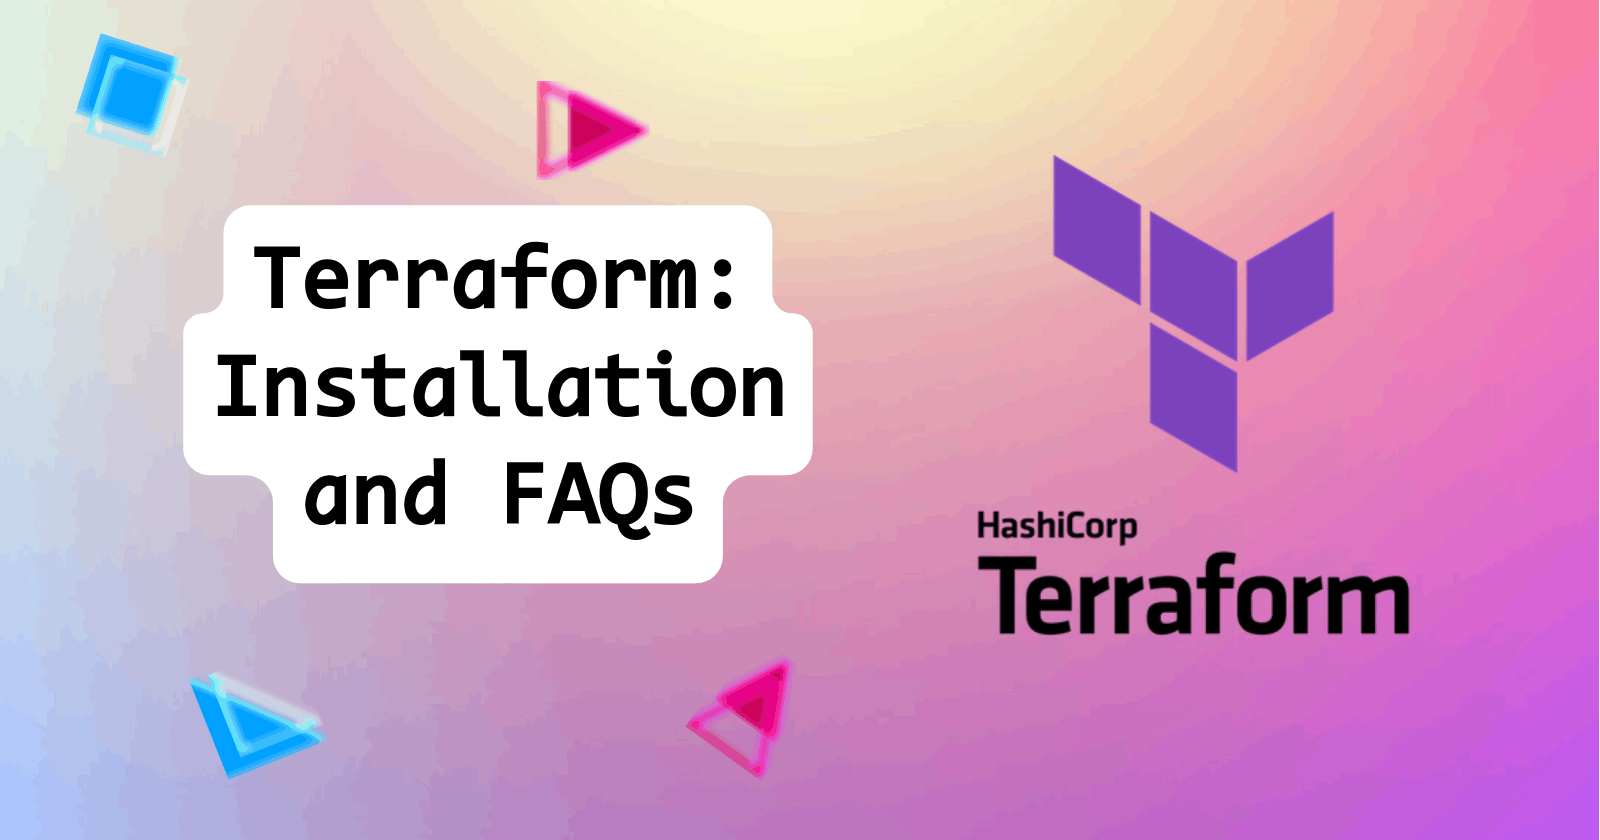 The Terraform Journey: Installation, IaC, Resources, and State Unveiled